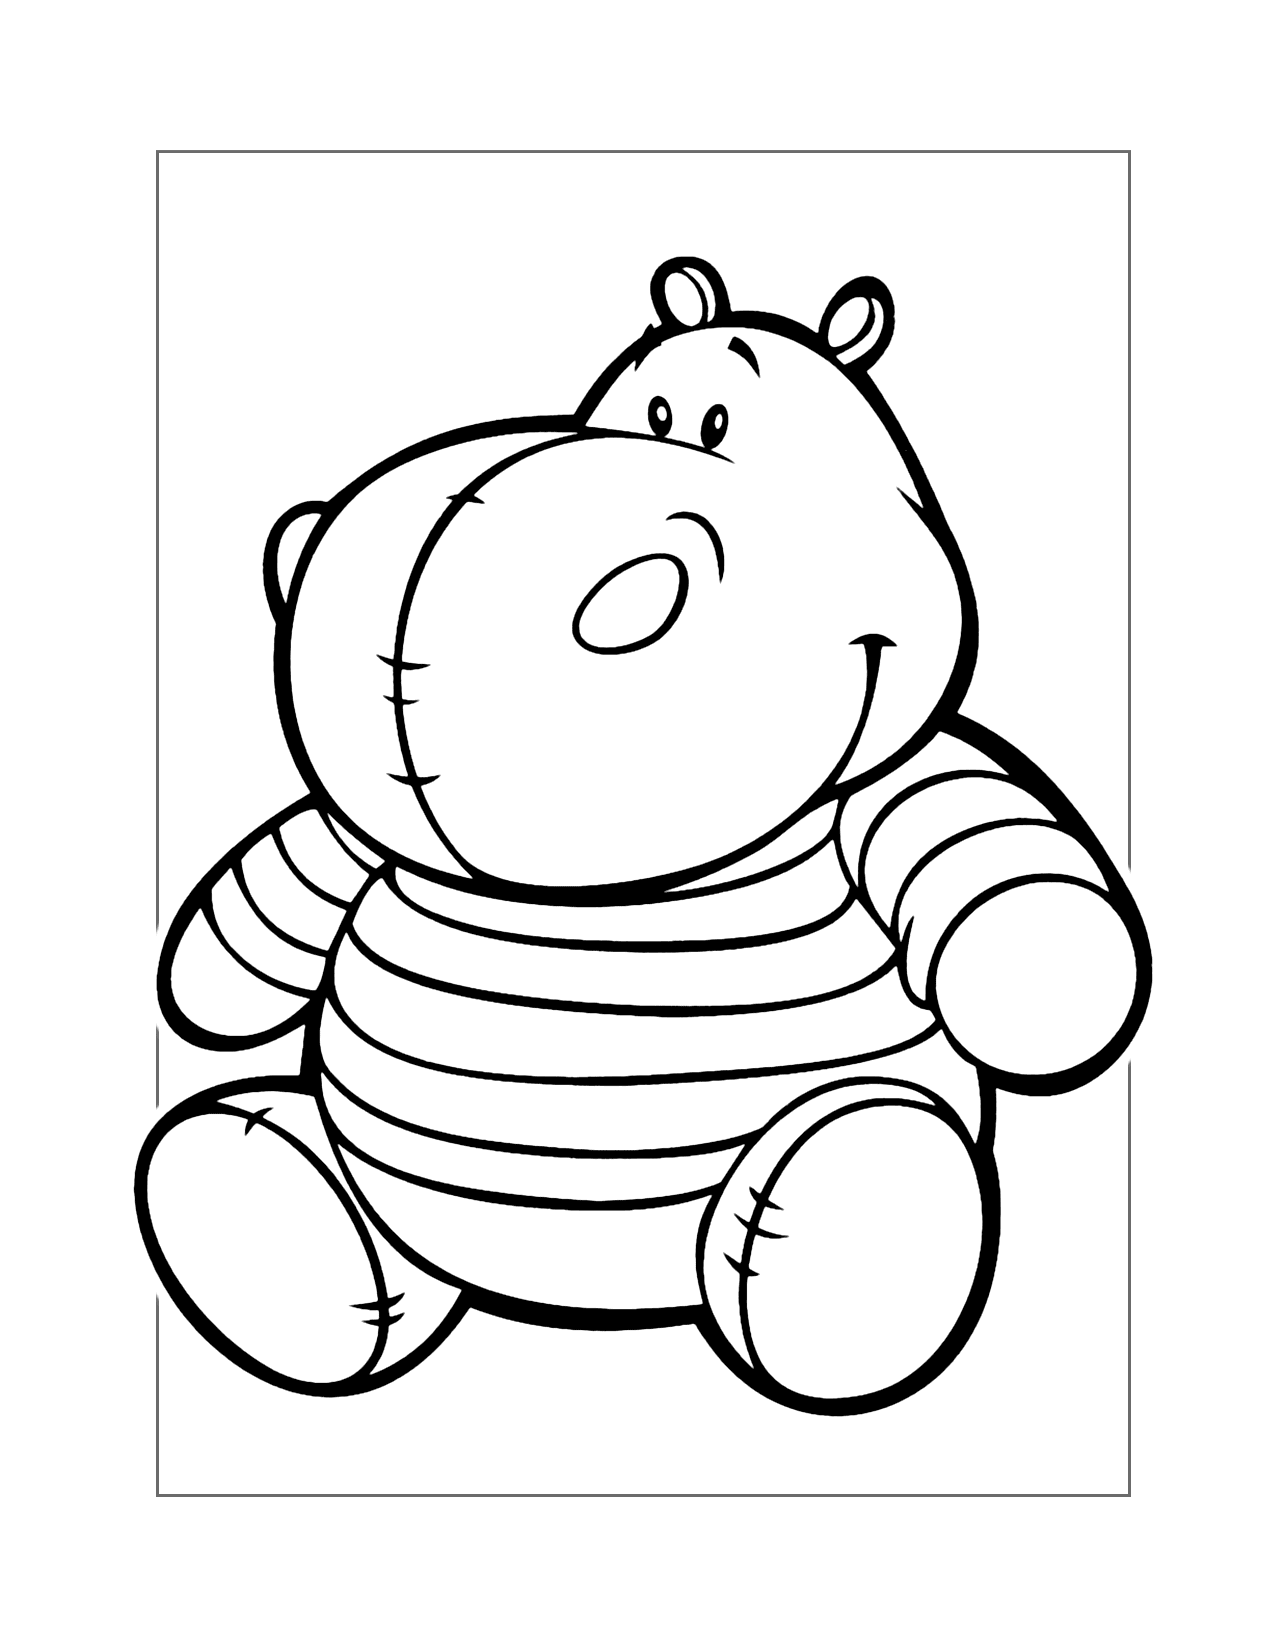 Stuffed Hippo Doll Coloring Page